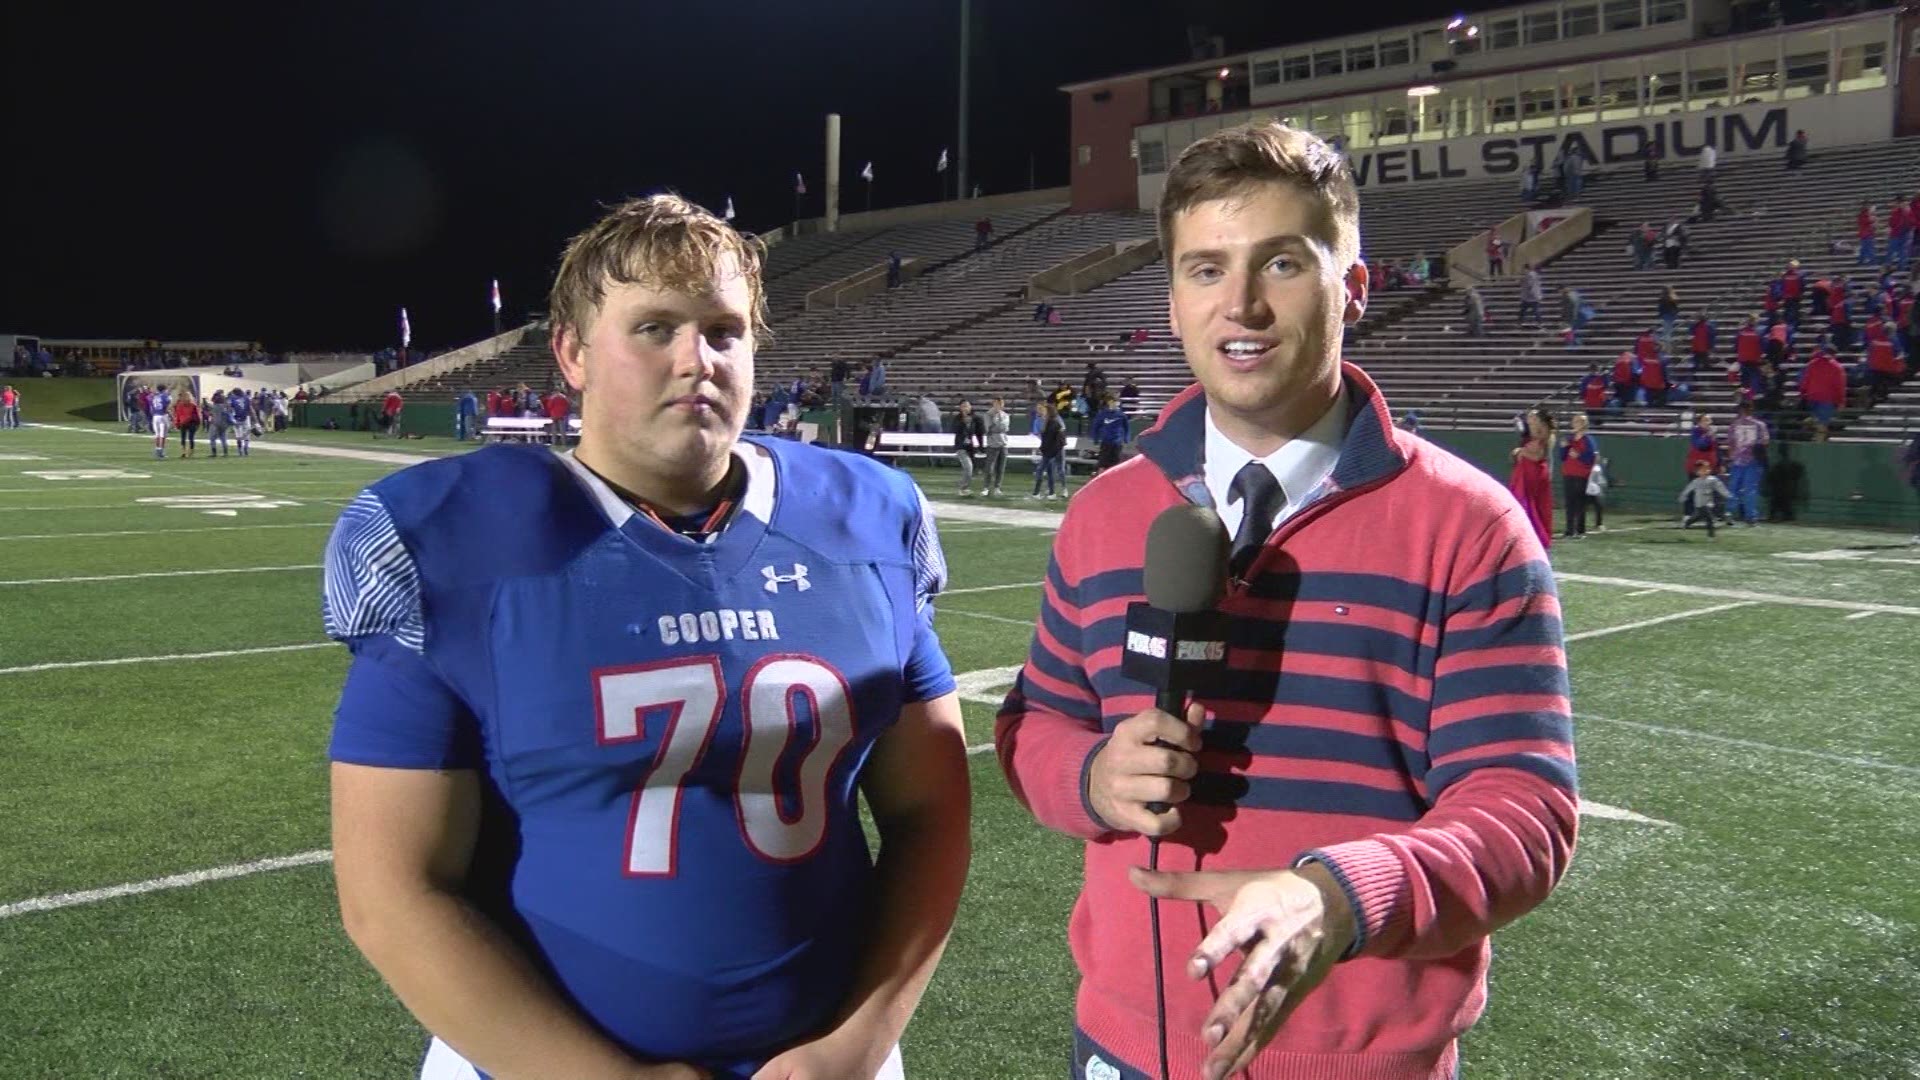 Our Mitchel Summers caught up with Offensive Linemen and Captain Thomas Squyres after Cooper won a huge district game over Amarillo Caprock.